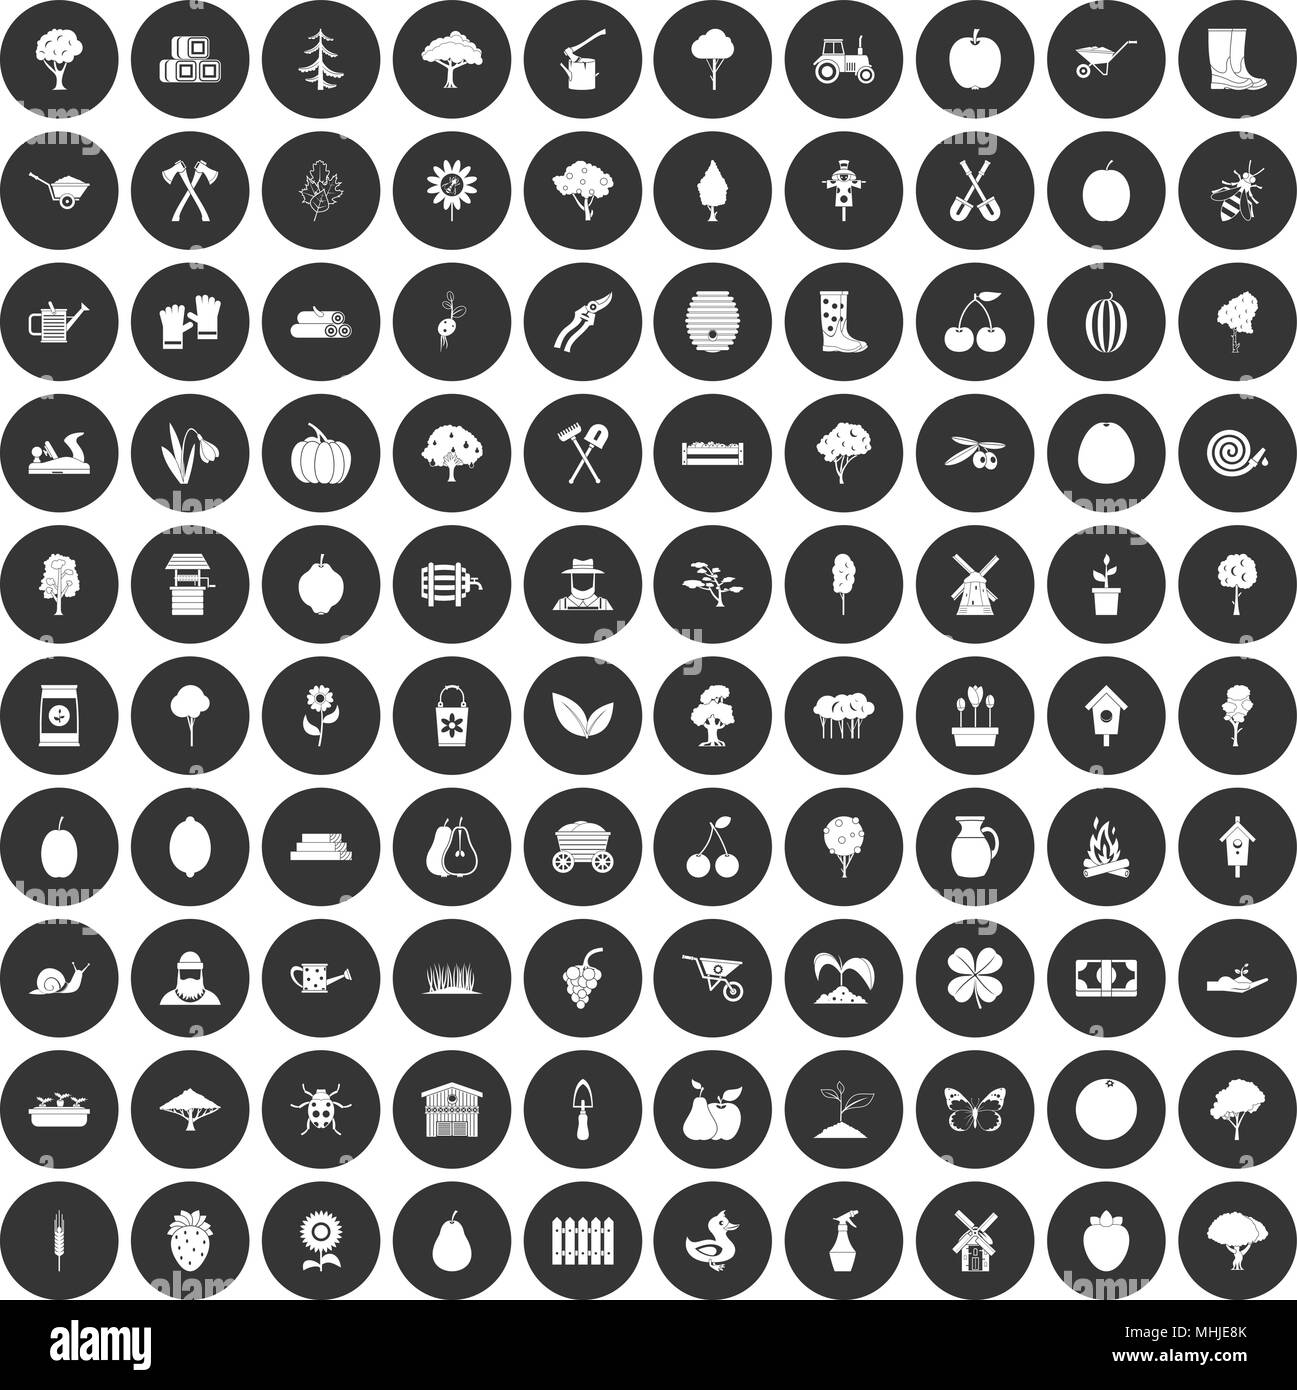 100 agriculture icons set black circle Stock Vector